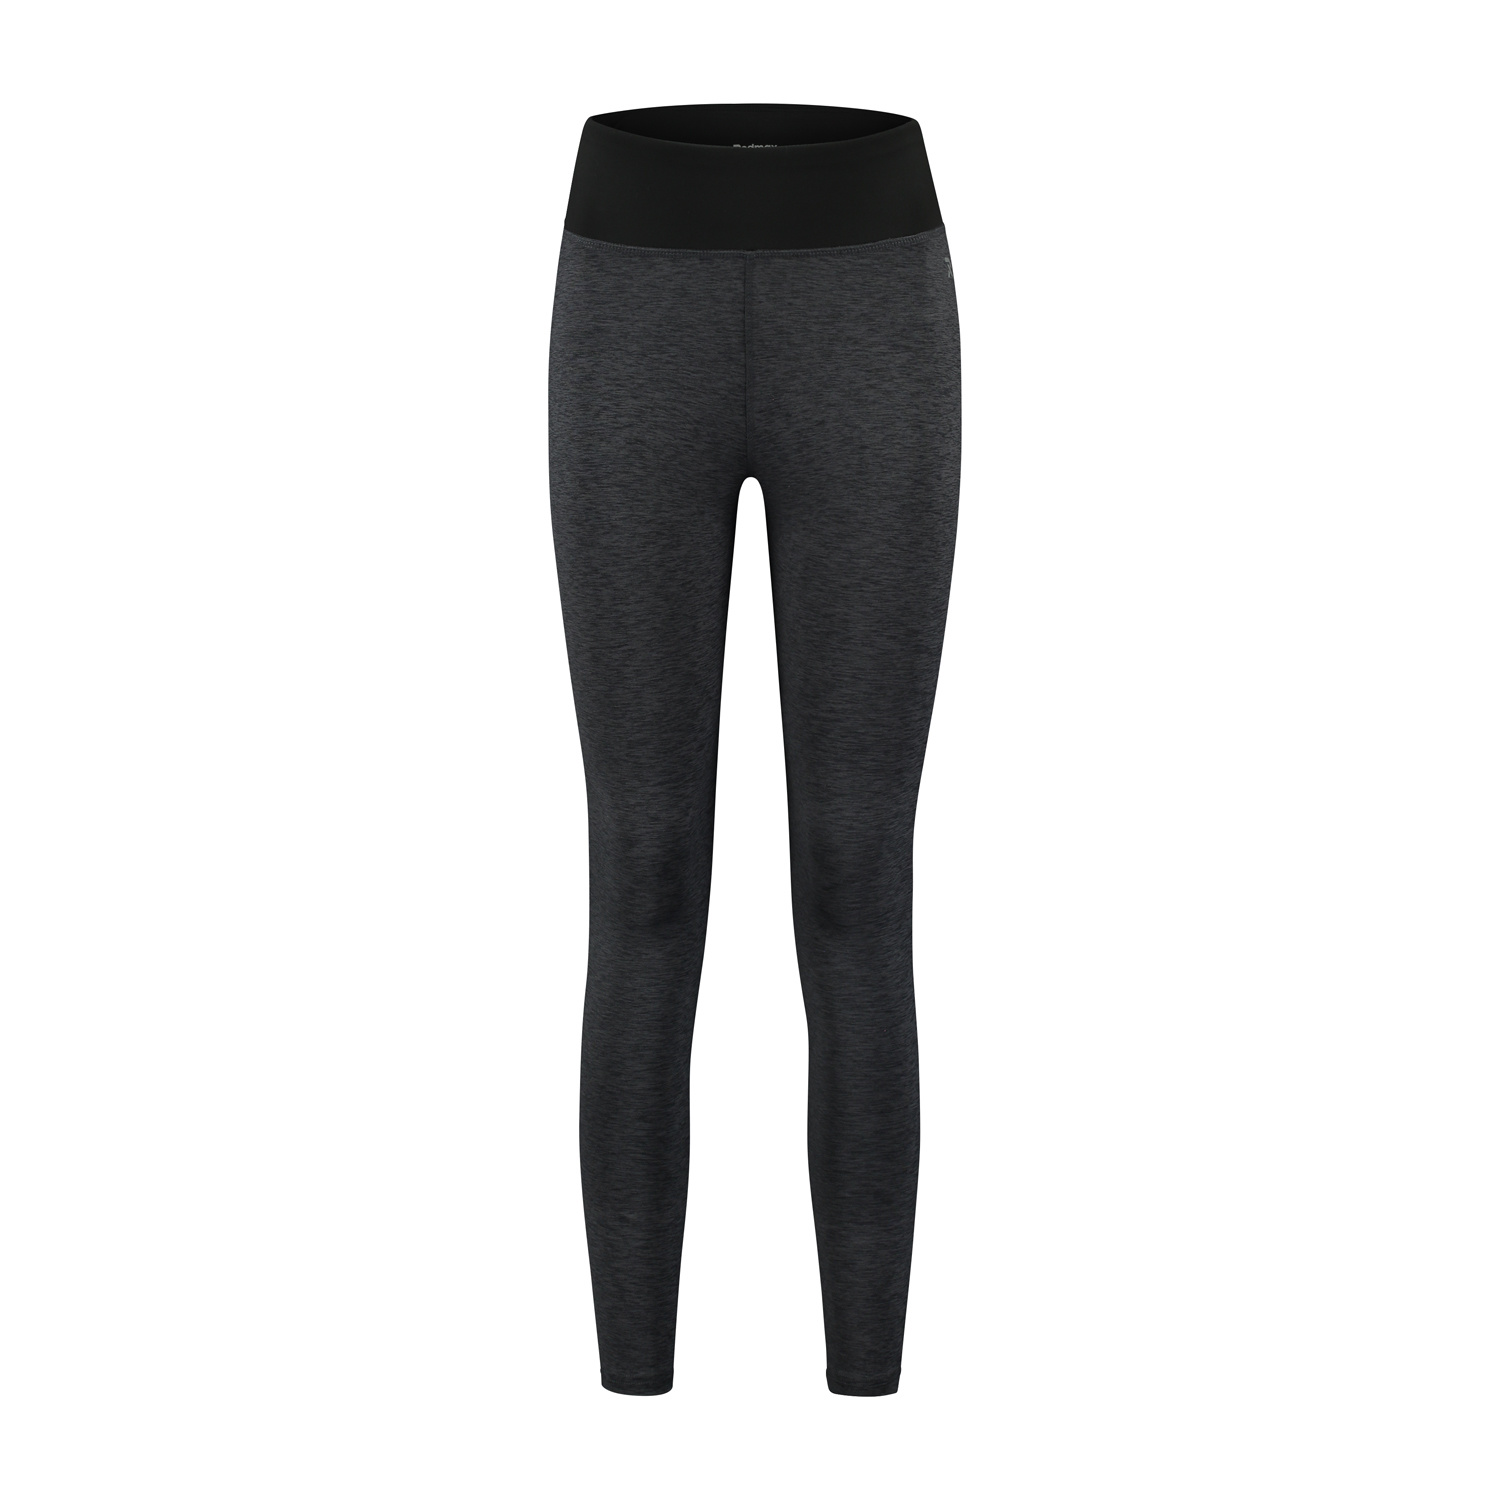 Redmax Women's sports legging Dry-Cool - sustainable 